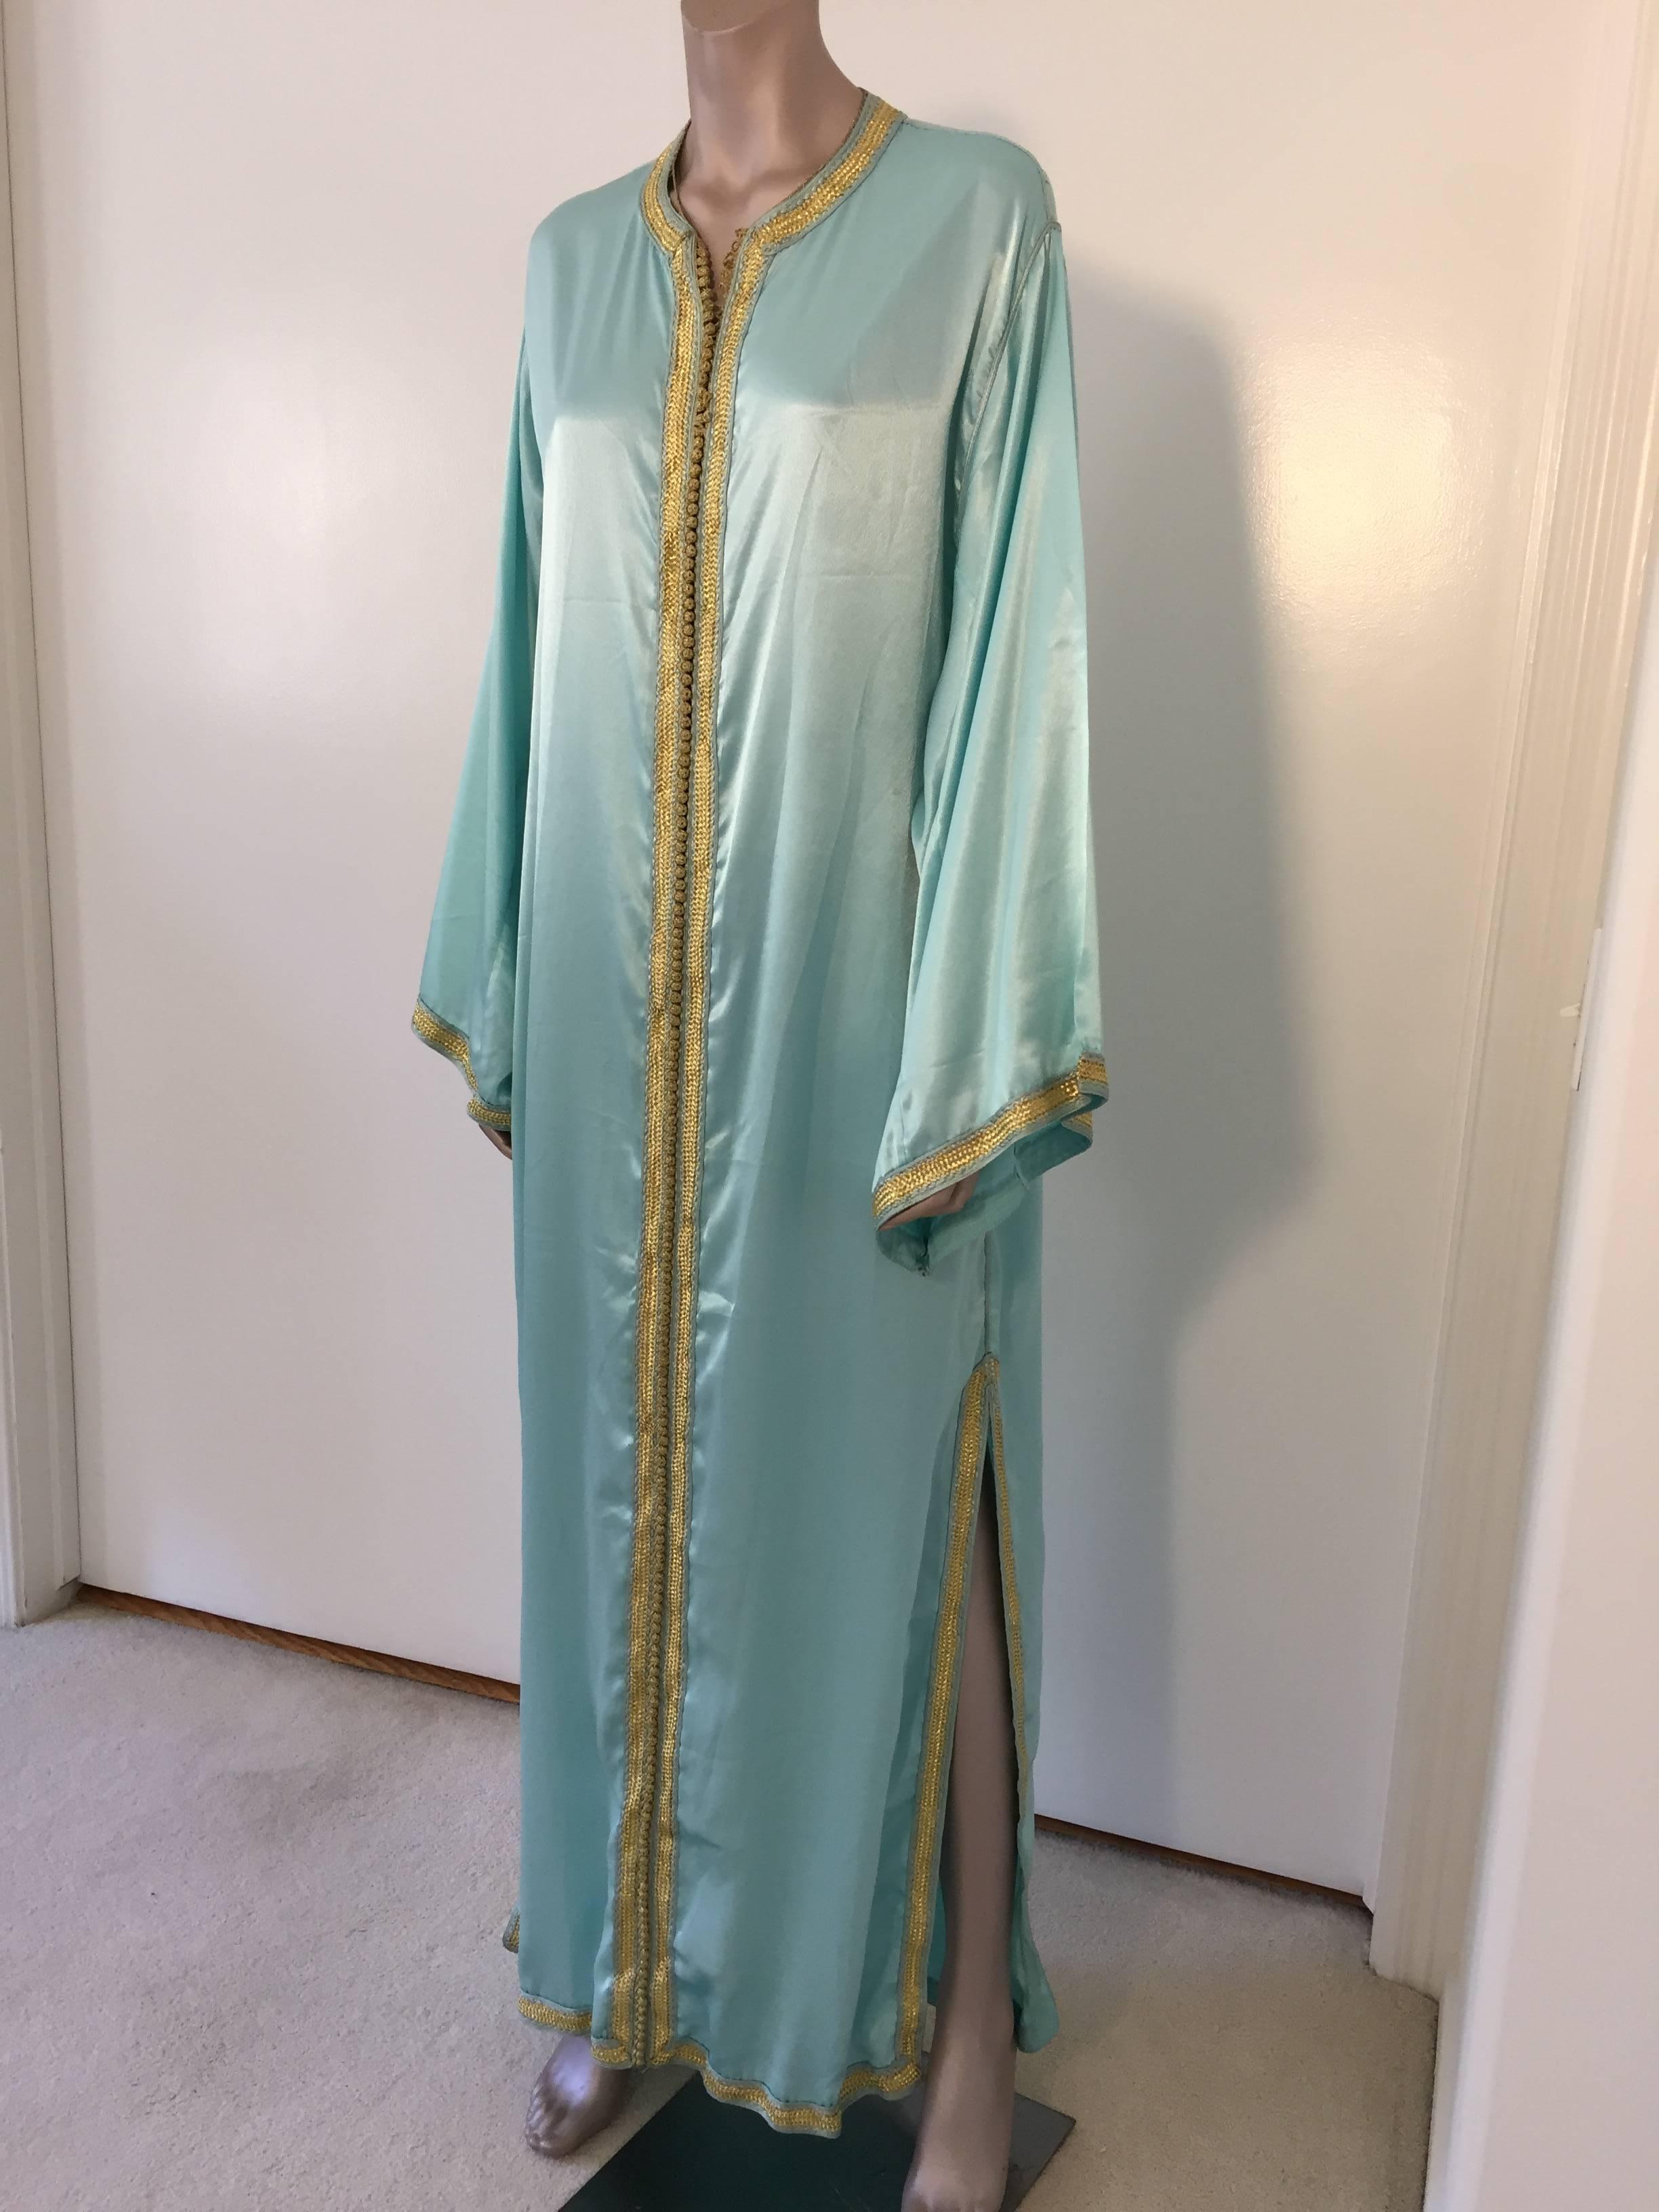 Hand-Crafted Moroccan Luxury Silk Caftan Gown Maxi Dress